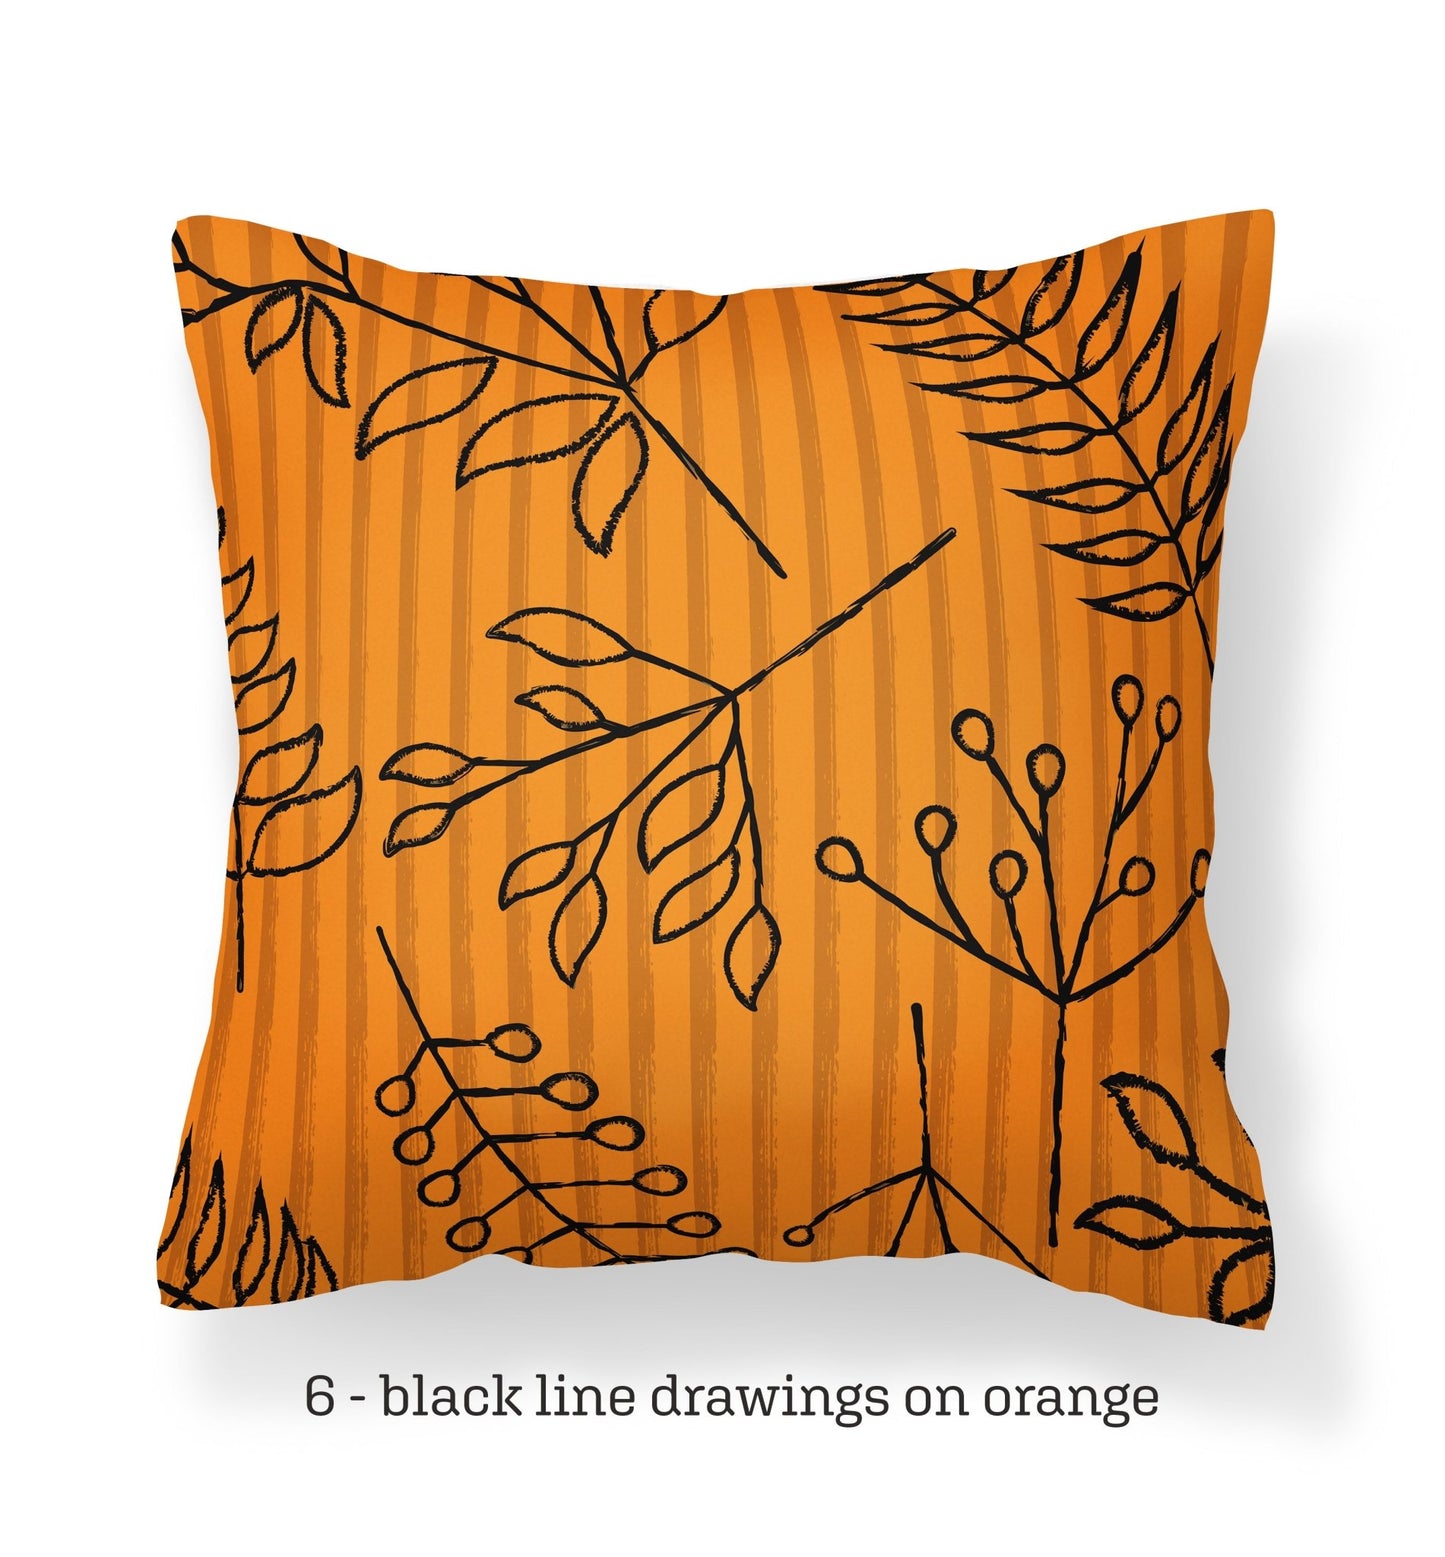 Boho Throw Pillow Covers - Mix and Match